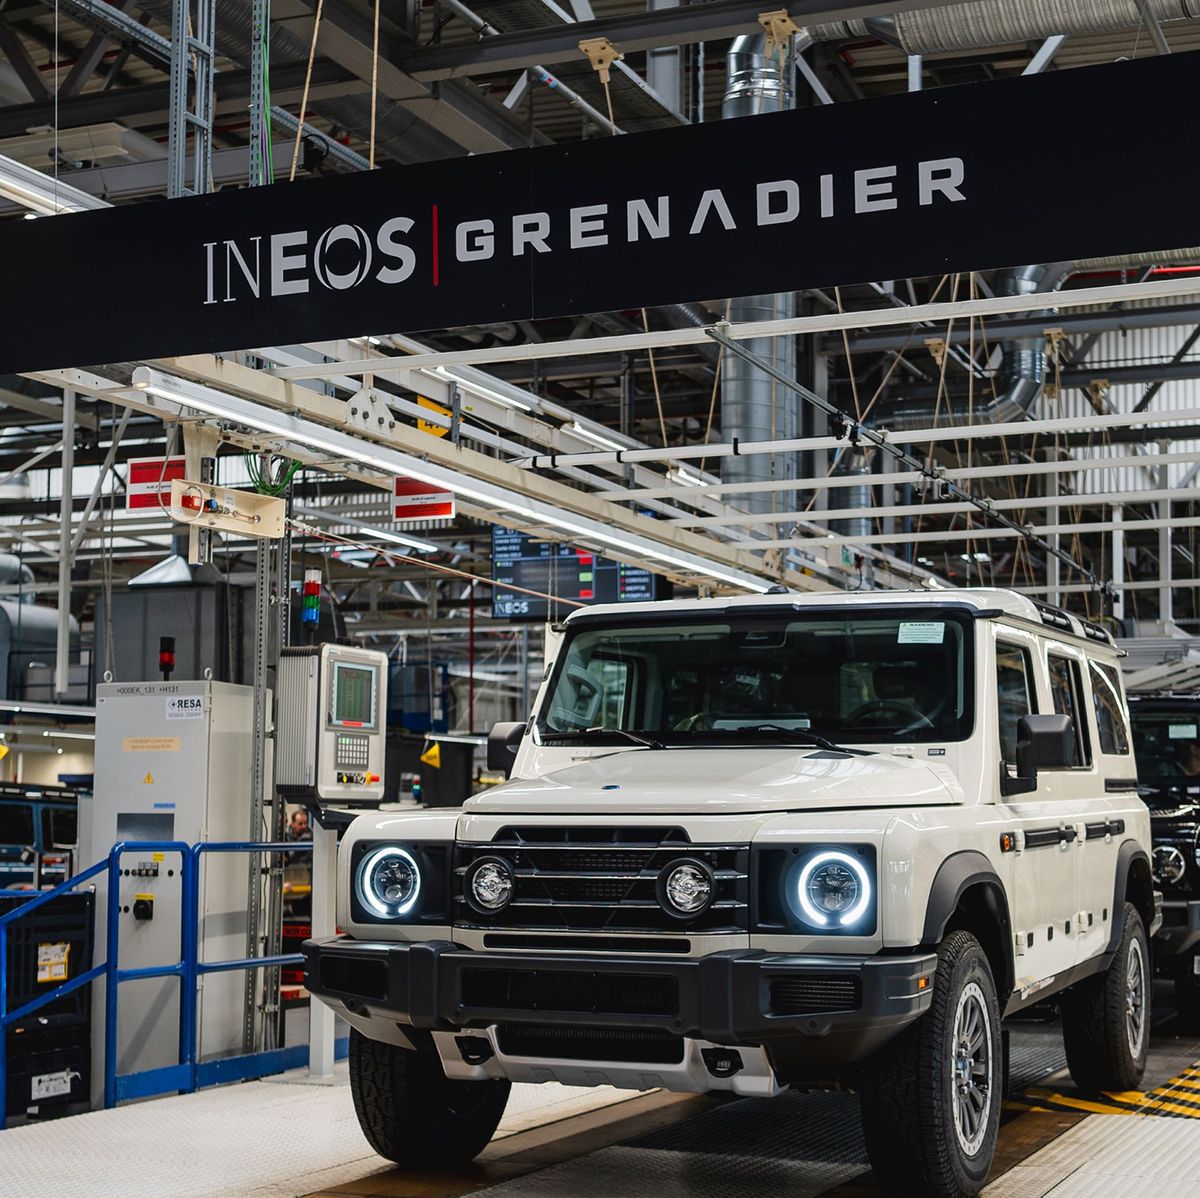 Ineos Grenadiers Are on the Way, but Is the Price Right?